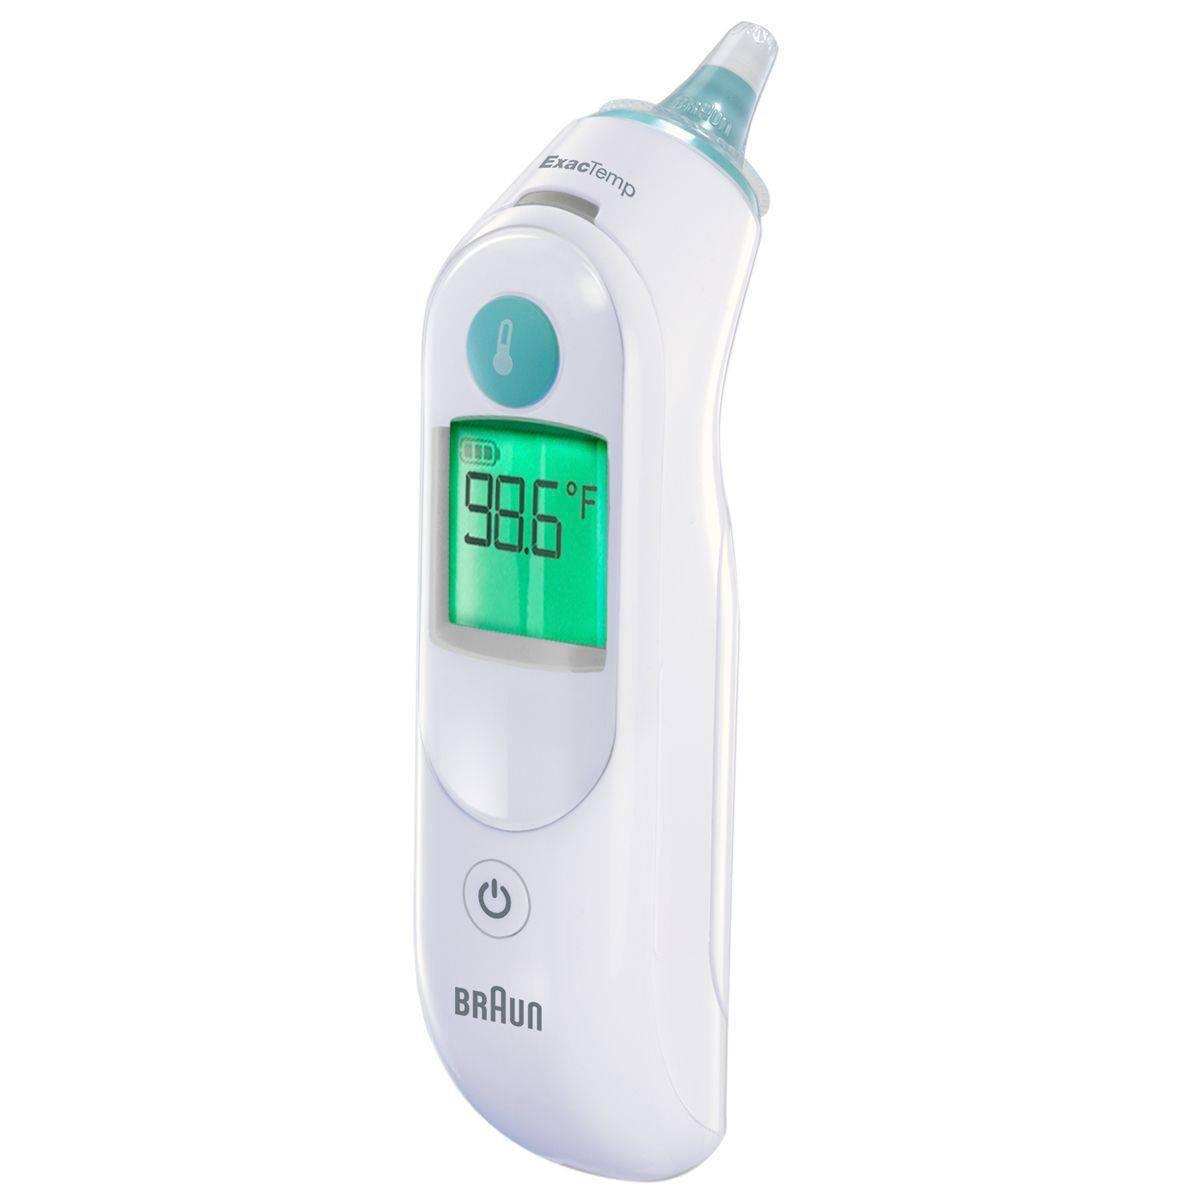 Braun IRT6515 Thermoscan 6 Thermometer w/ Lens Filters - Patented Pre-Warmed Tip